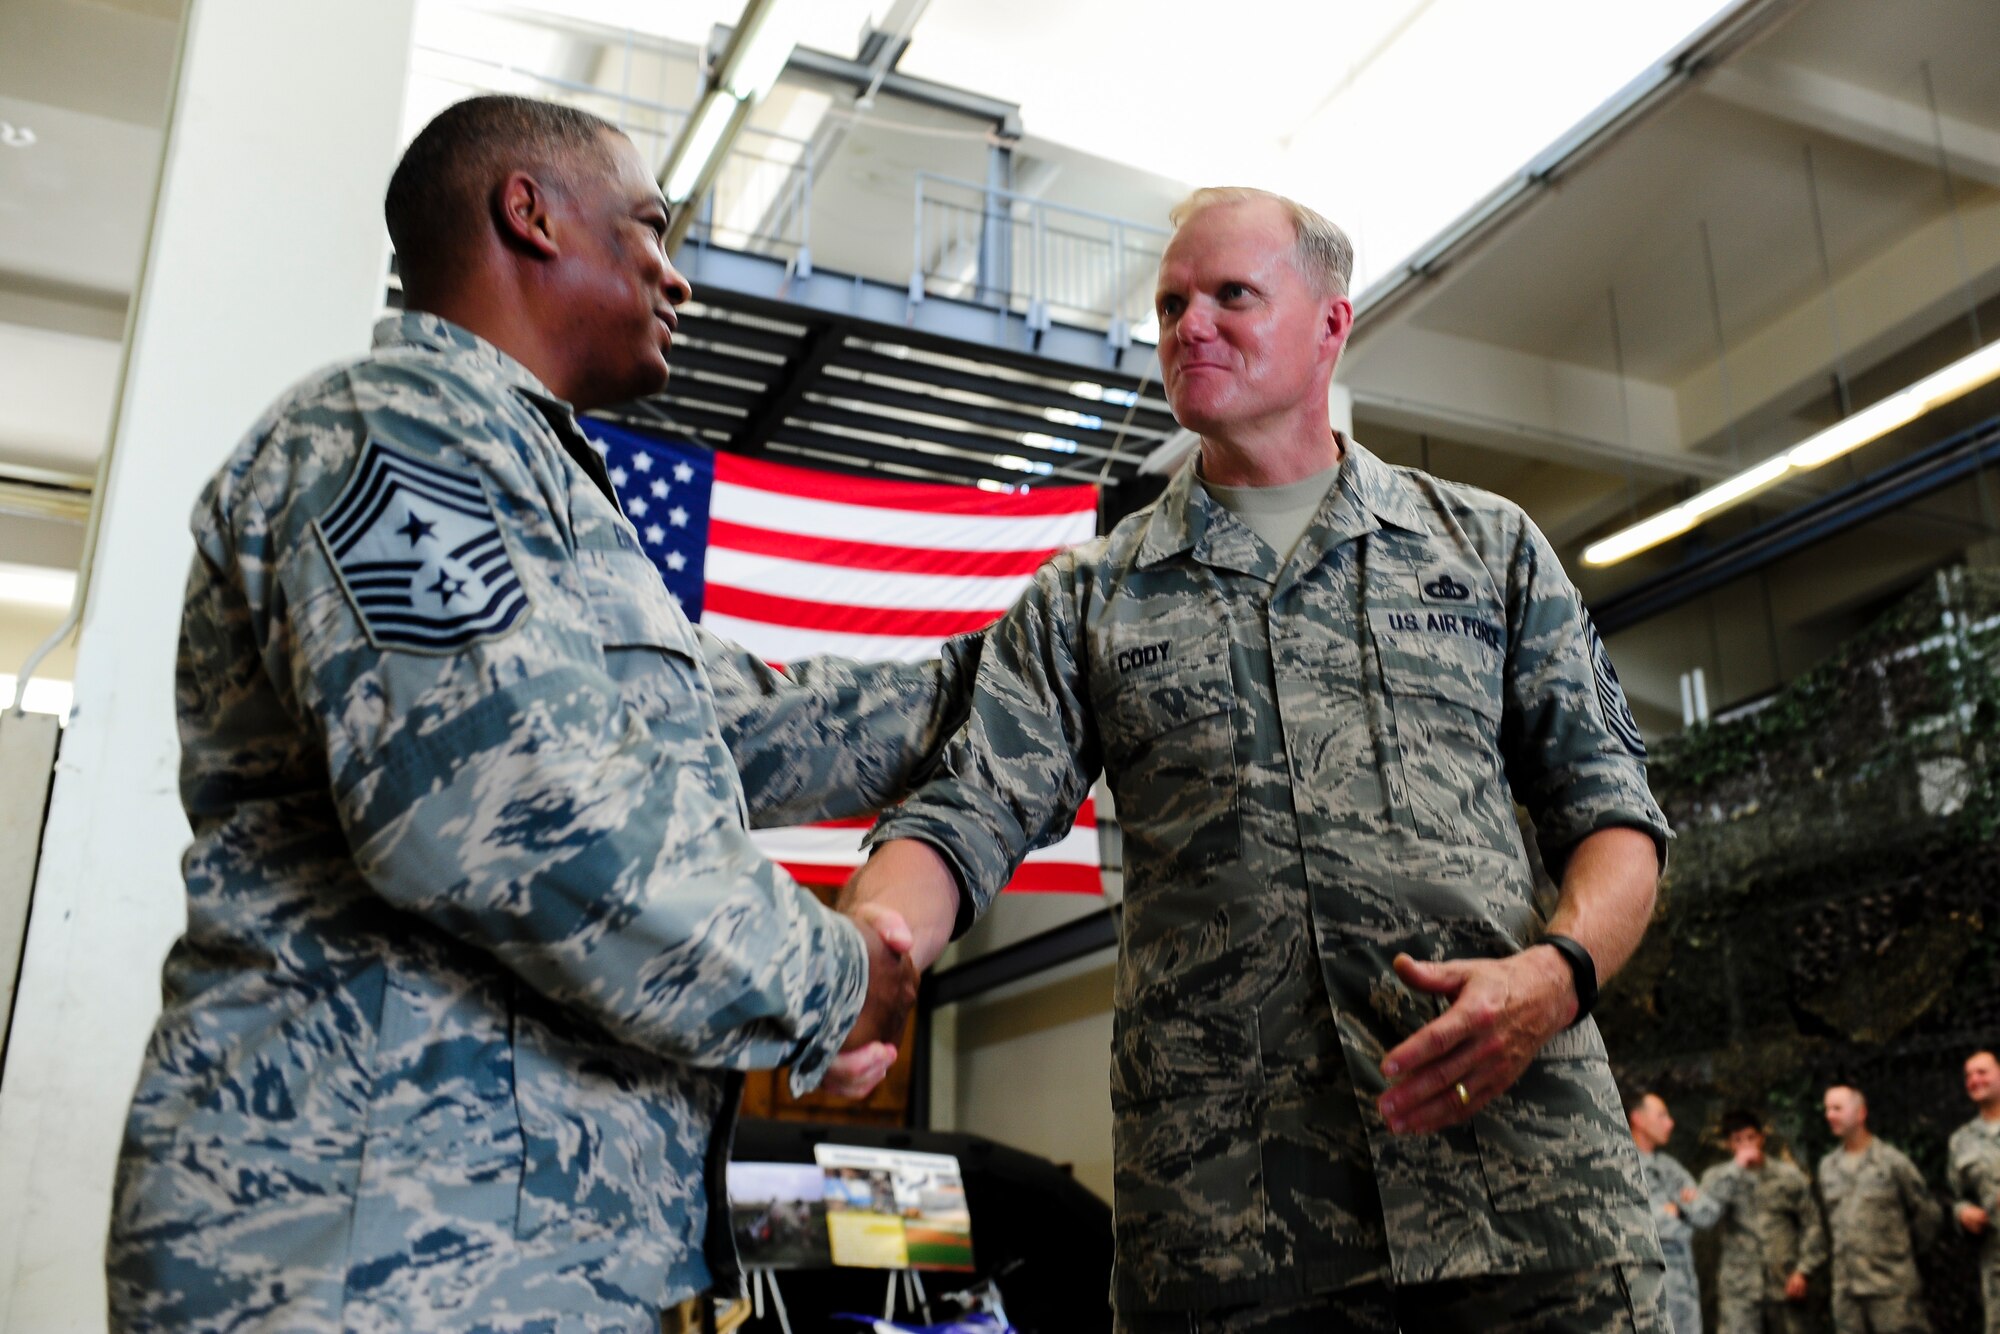 Chief Master Sgt. of the Air Force James Cody speaks to NCOs during a luncheon, July 8, 2015, on Kadena Air Base, Japan. Since arriving on Kadena July 5, Cody addressed challenges and opportunities facing today’s Airmen, such as possible changes to retirement, Senior NCO Academy and the recent changes to the Enlisted Evaluation System. (U.S. Air Force photo by Airman 1st Class John Linzmeier/Released)
